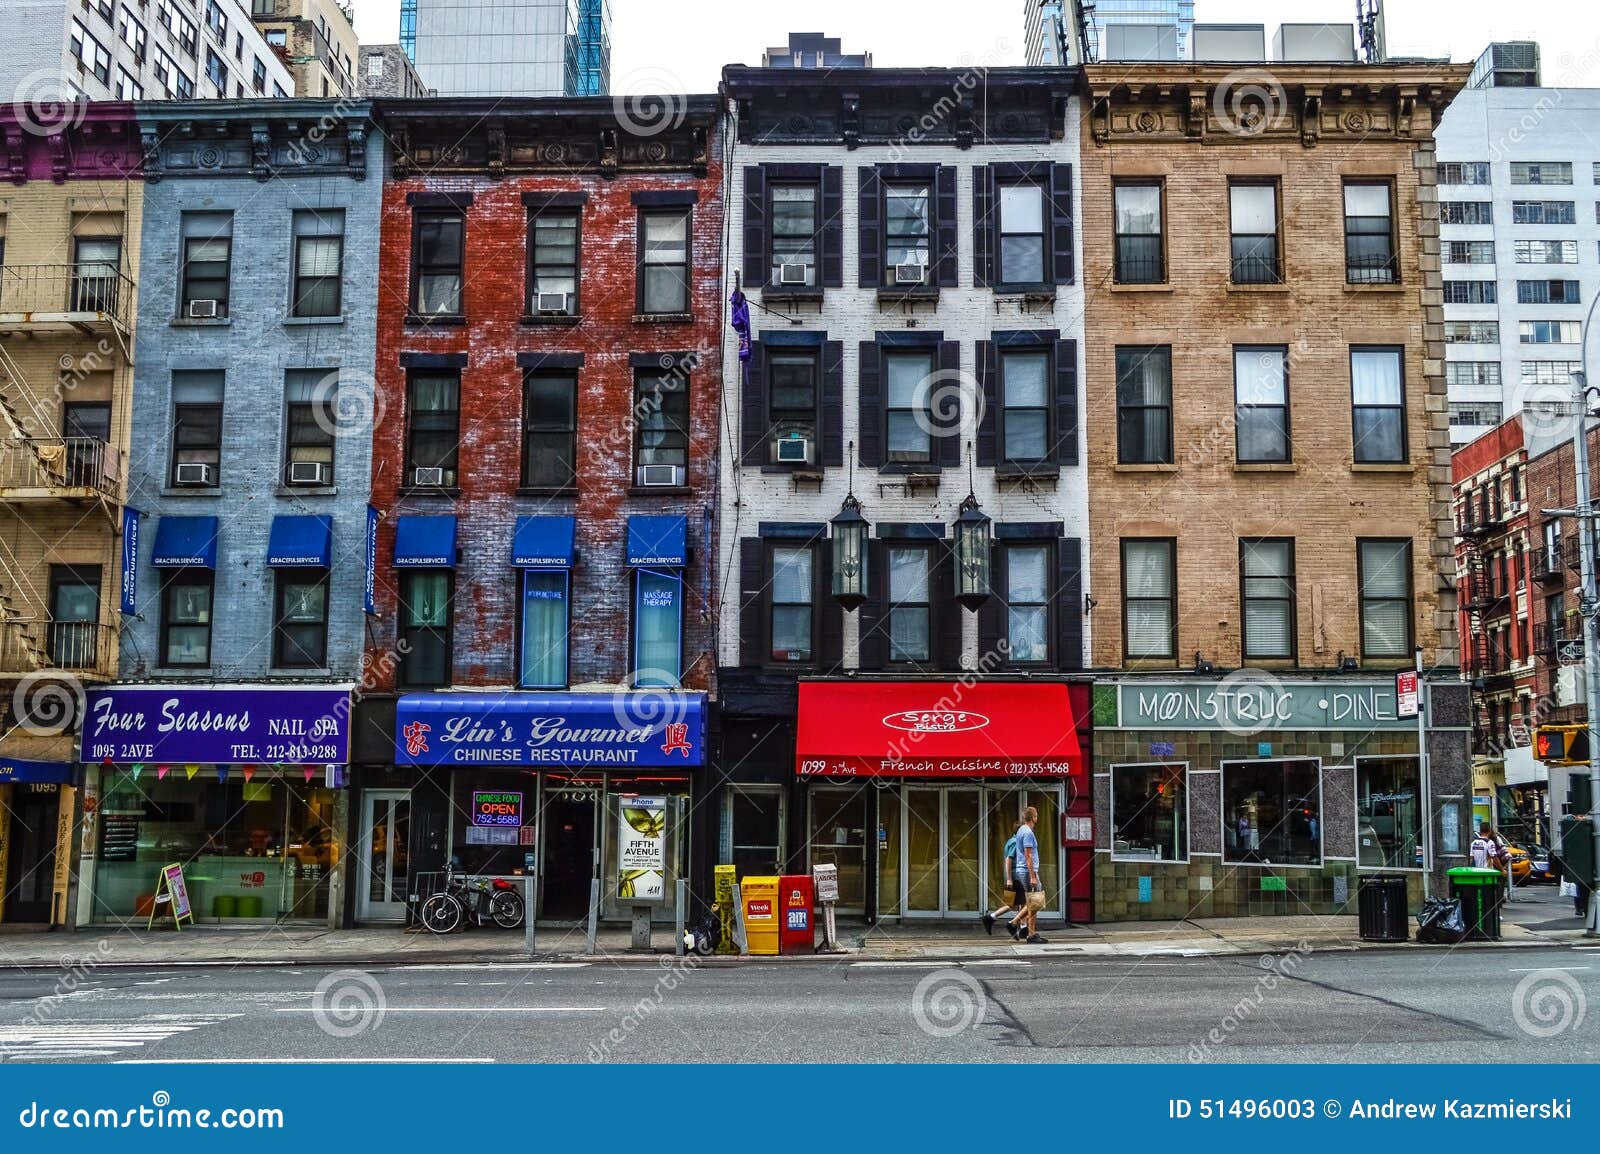 Small Business New York City Editorial Stock Photo Image of side